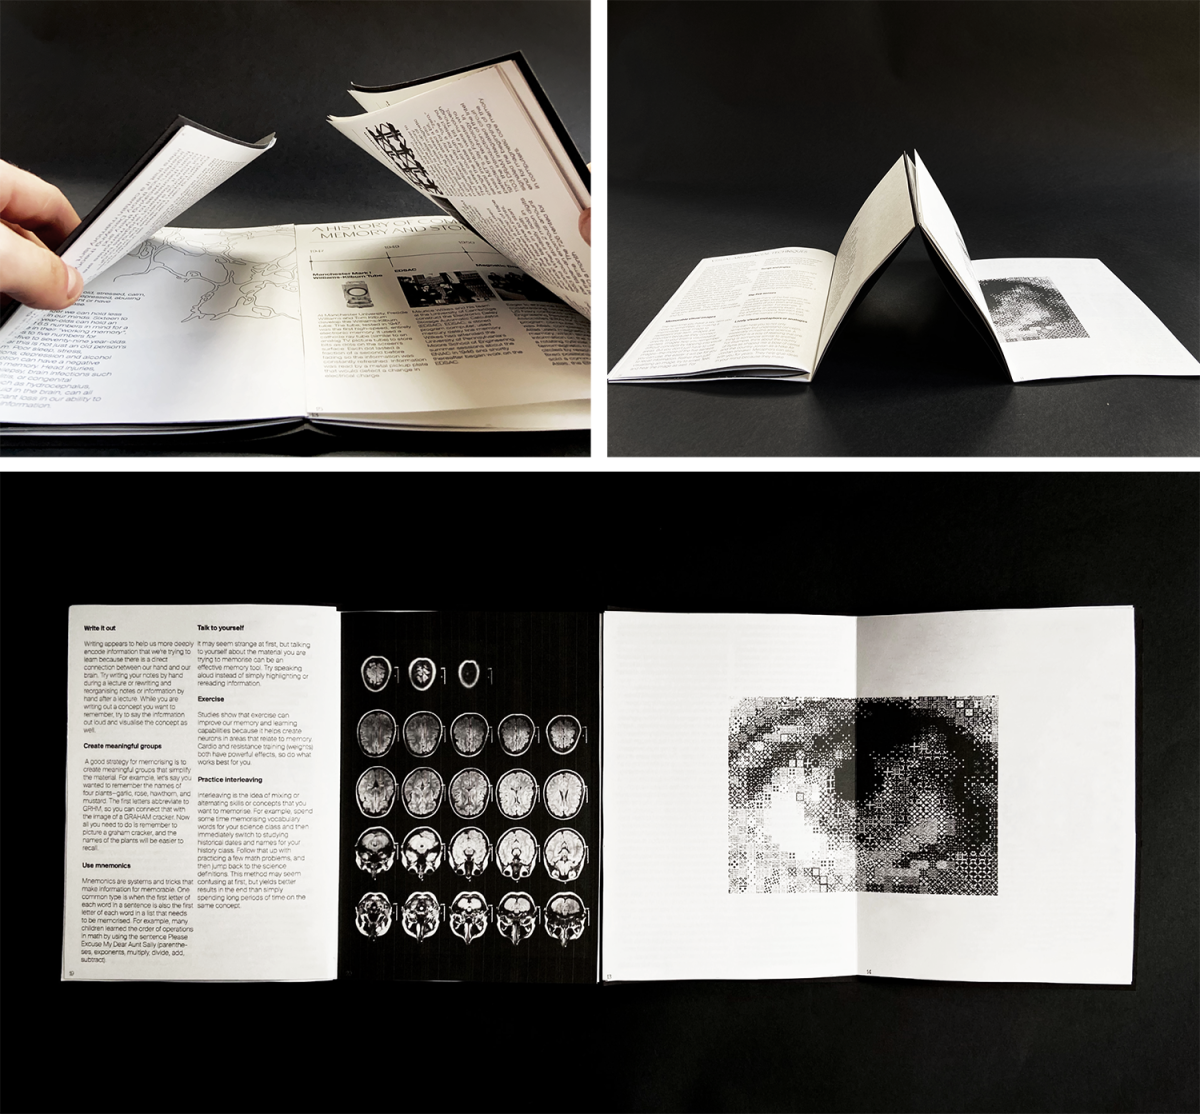 'Thanks For The Memory'; Publication. This book folds out to contain two sections. The first section explores all things natural memory and the second section all things digital memory. It covers a range of topics such as the science behind memory, false memories, memory loss and the effects of technology on our natural memory systems